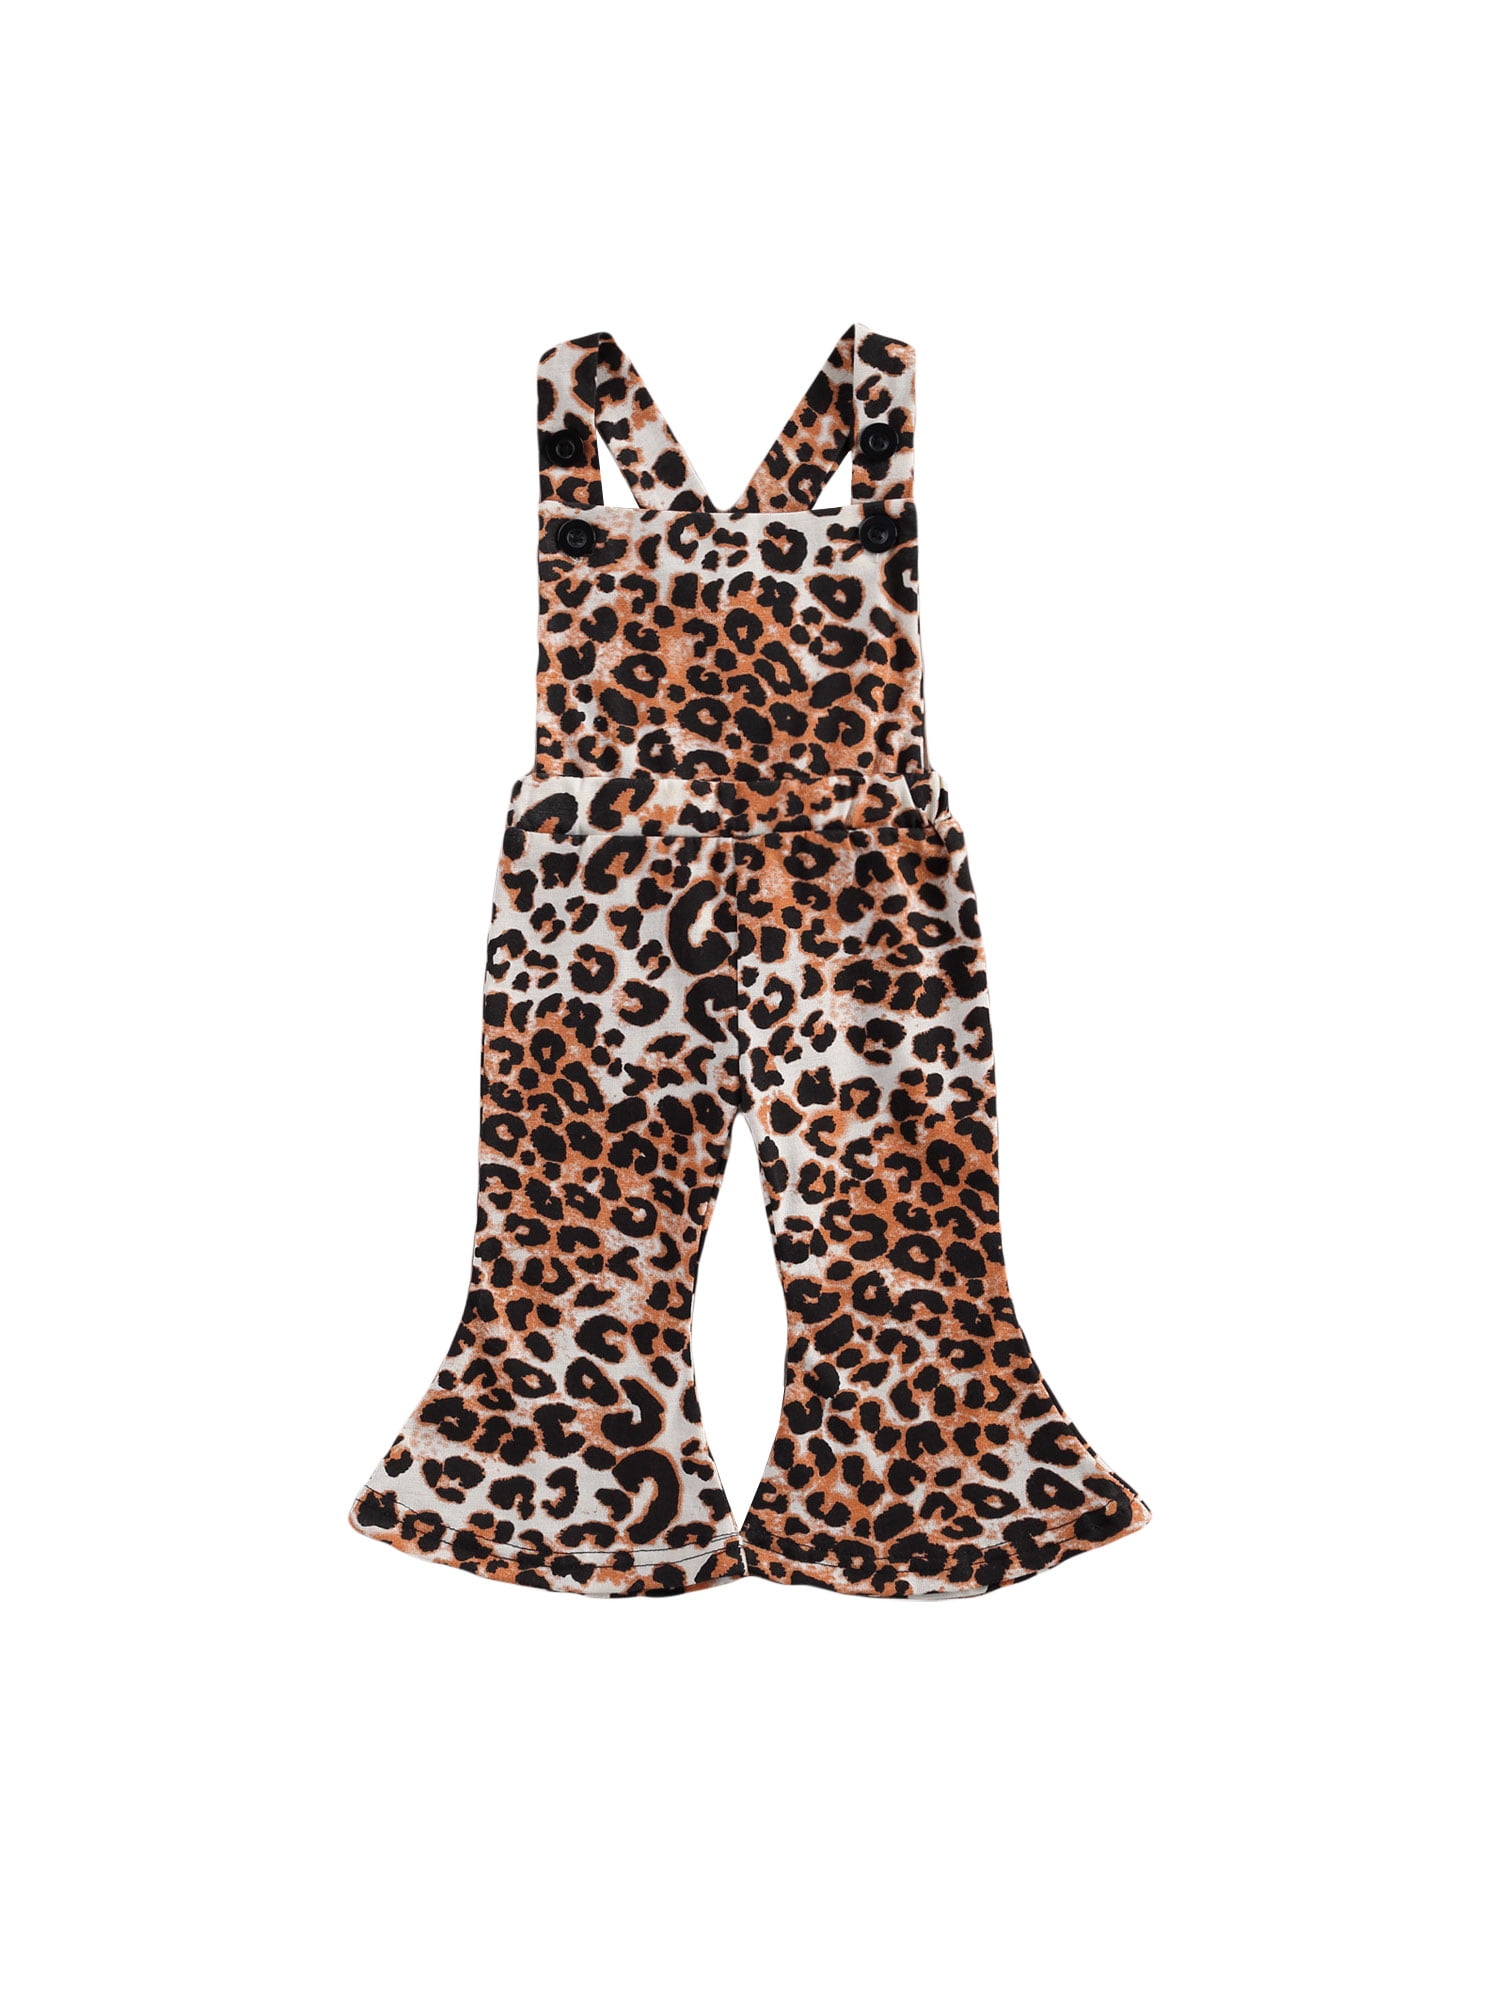 Leopard Print Baby Girls Cartoon Backless Romper Playsuit Clothes Outfits SH 